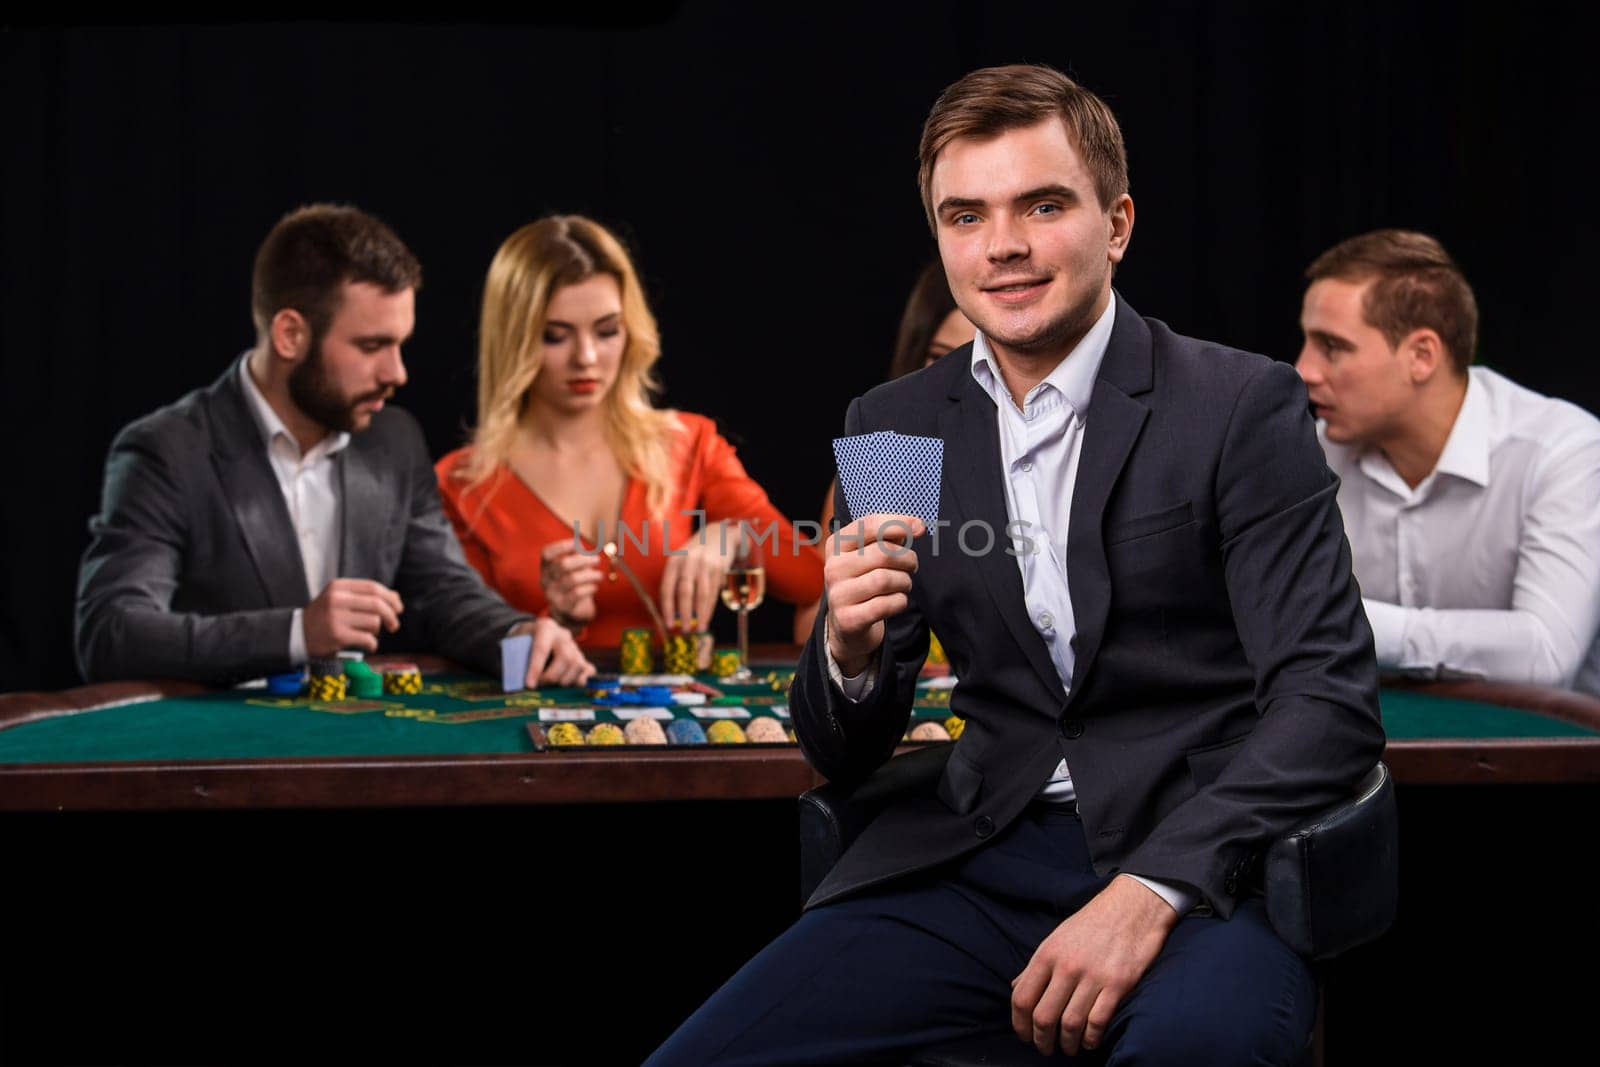 Young people playing poker at the table. Casino by nazarovsergey